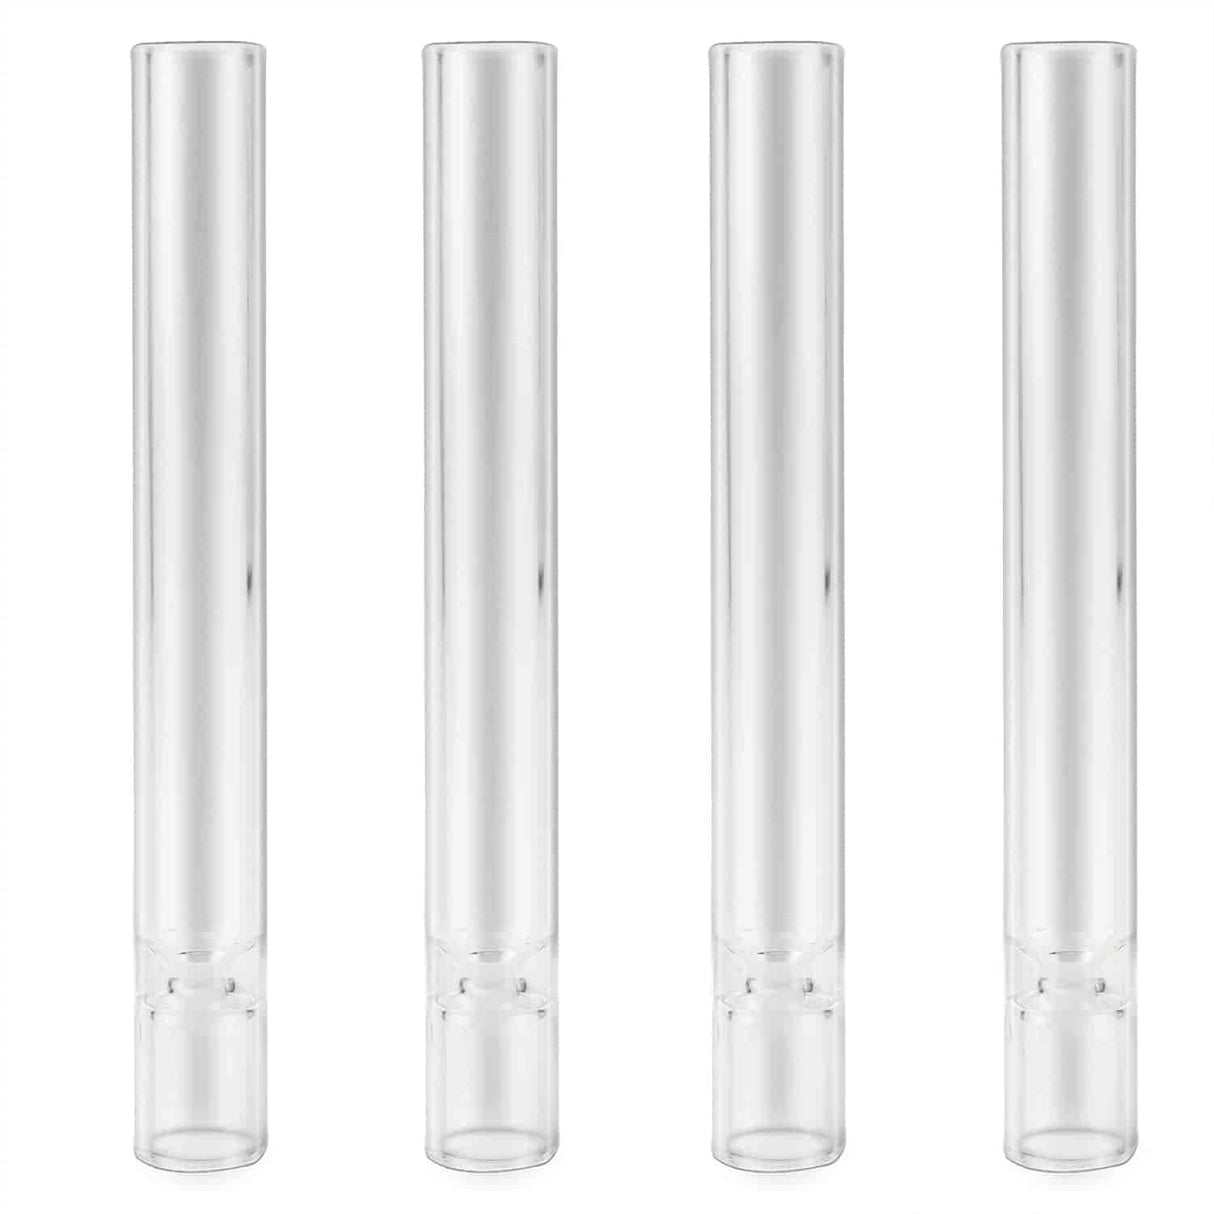 PILOT DIARY Quartz One Hitter 4-piece set, clear and sleek design, easy to clean